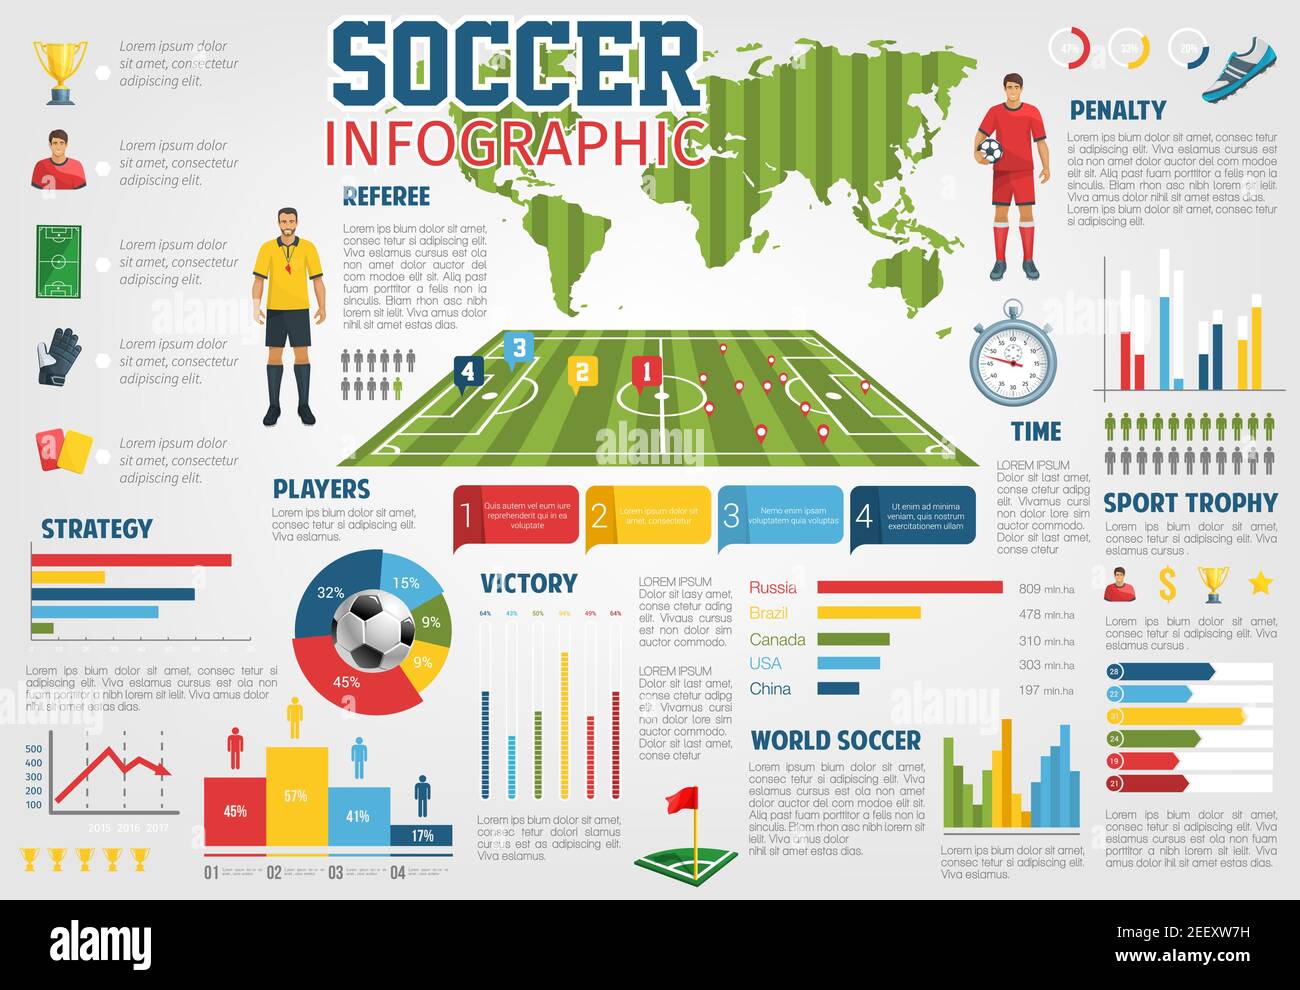 100,000 Soccer stats Vector Images